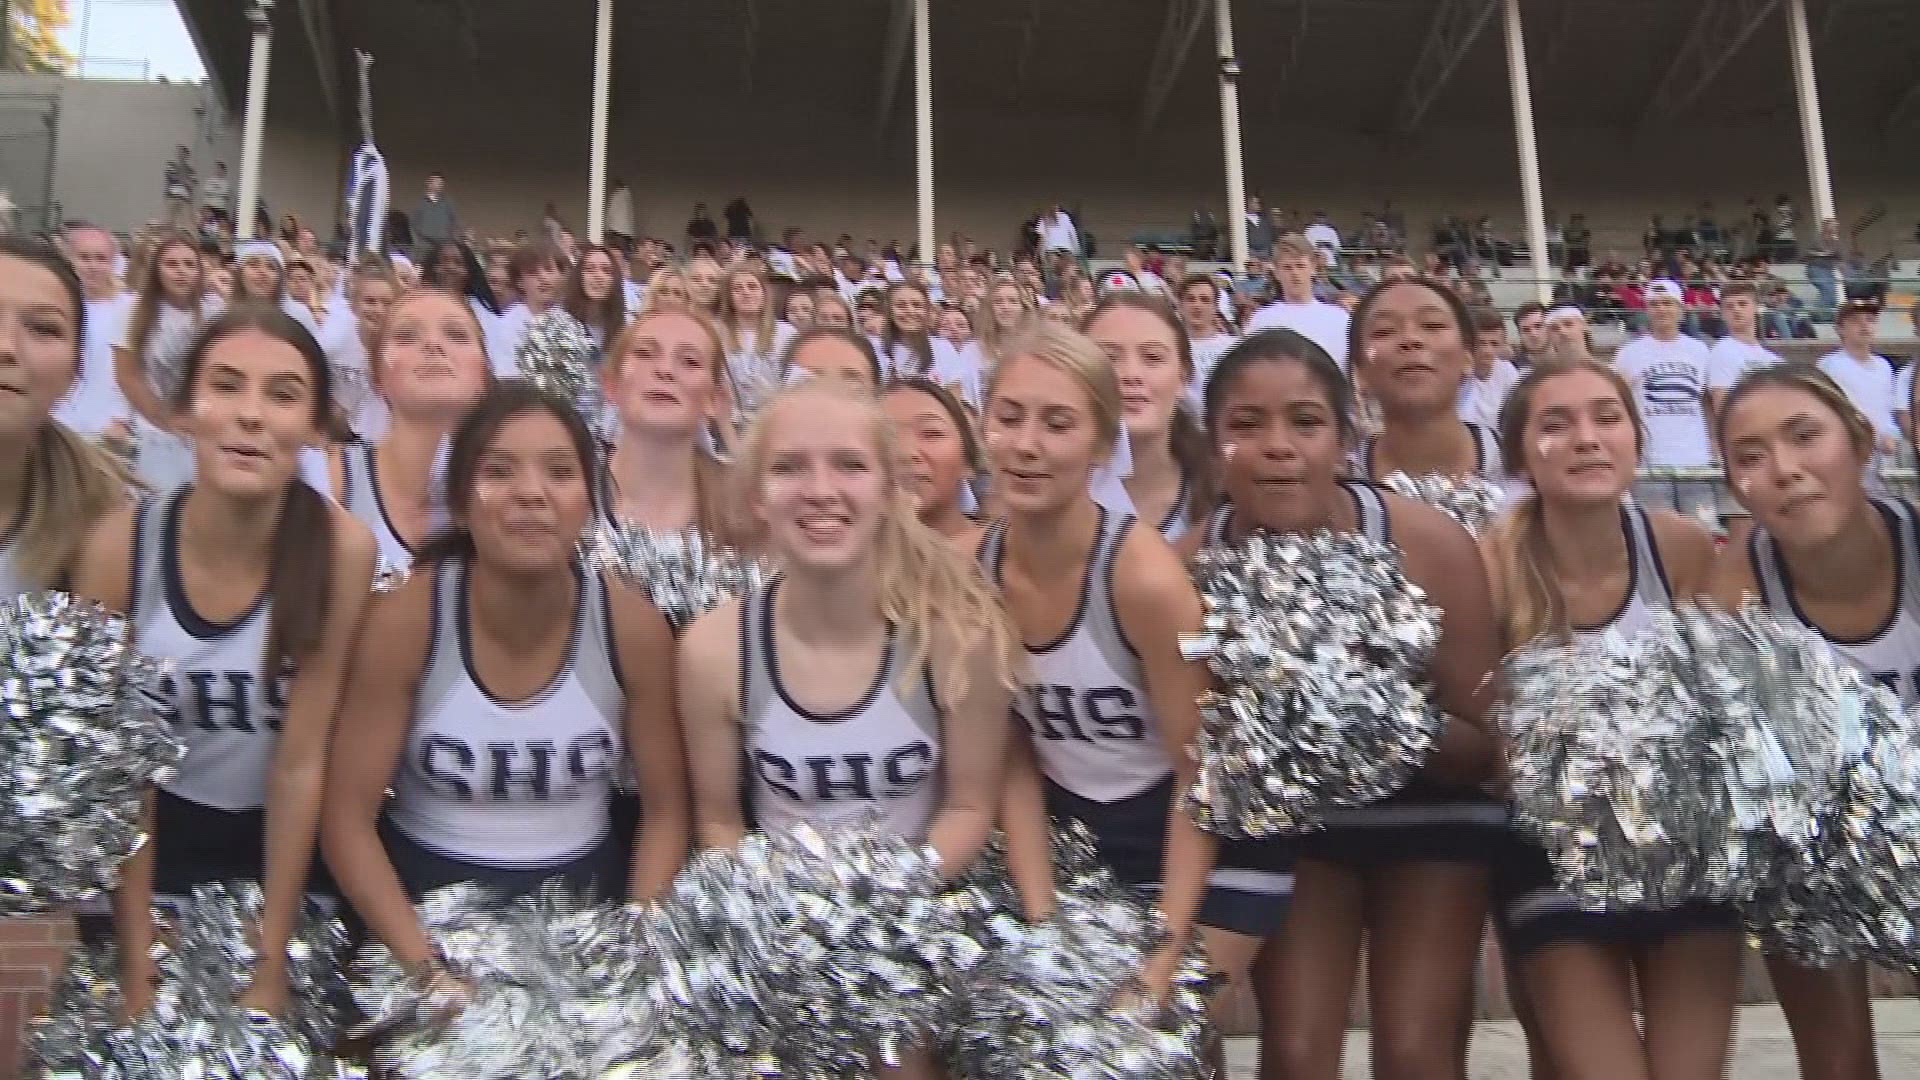 Highlights of the Skyview Storm's 2018 season in Washington. All highlights aired on KGW's Friday Night Flights #KGWPreps